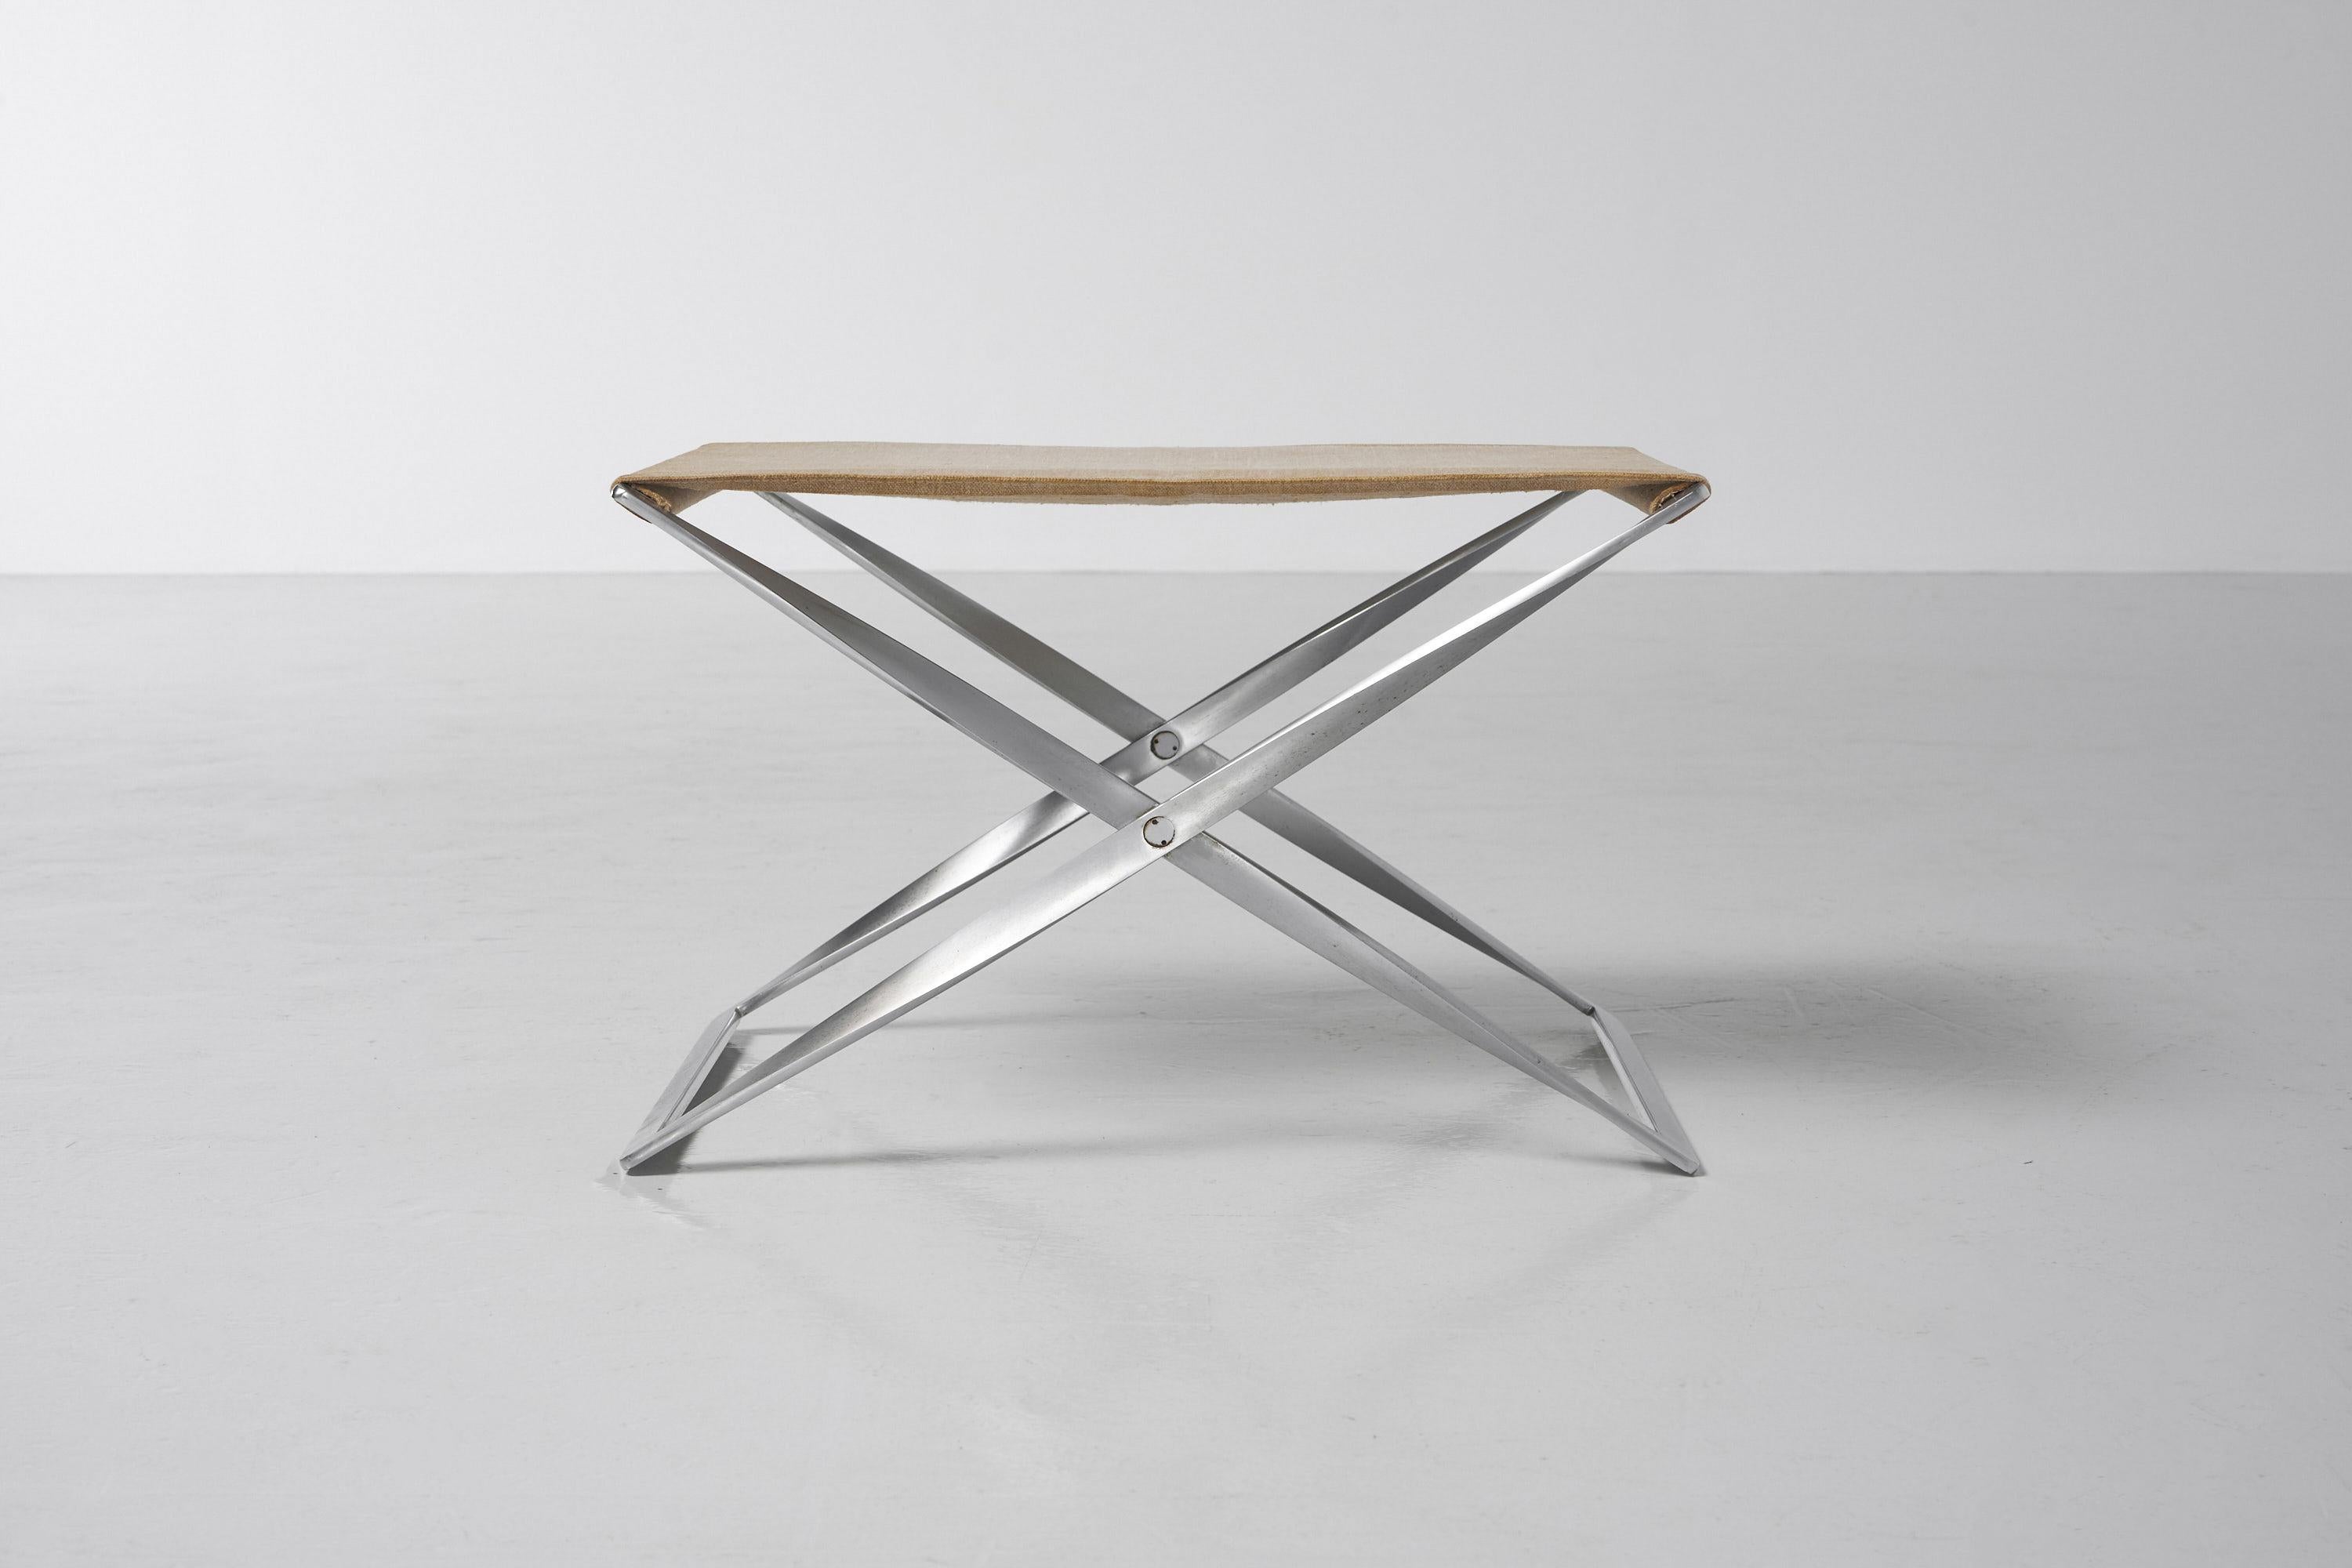 Iconic PK91 stool designed by Poul Kjaerholm and a first production manufactured by Ejvind Kold Christensen, Denmark 1961. This foldable stool has a matt chrome plated steel frame which is foldable due to an ingenious joint structure in the middle